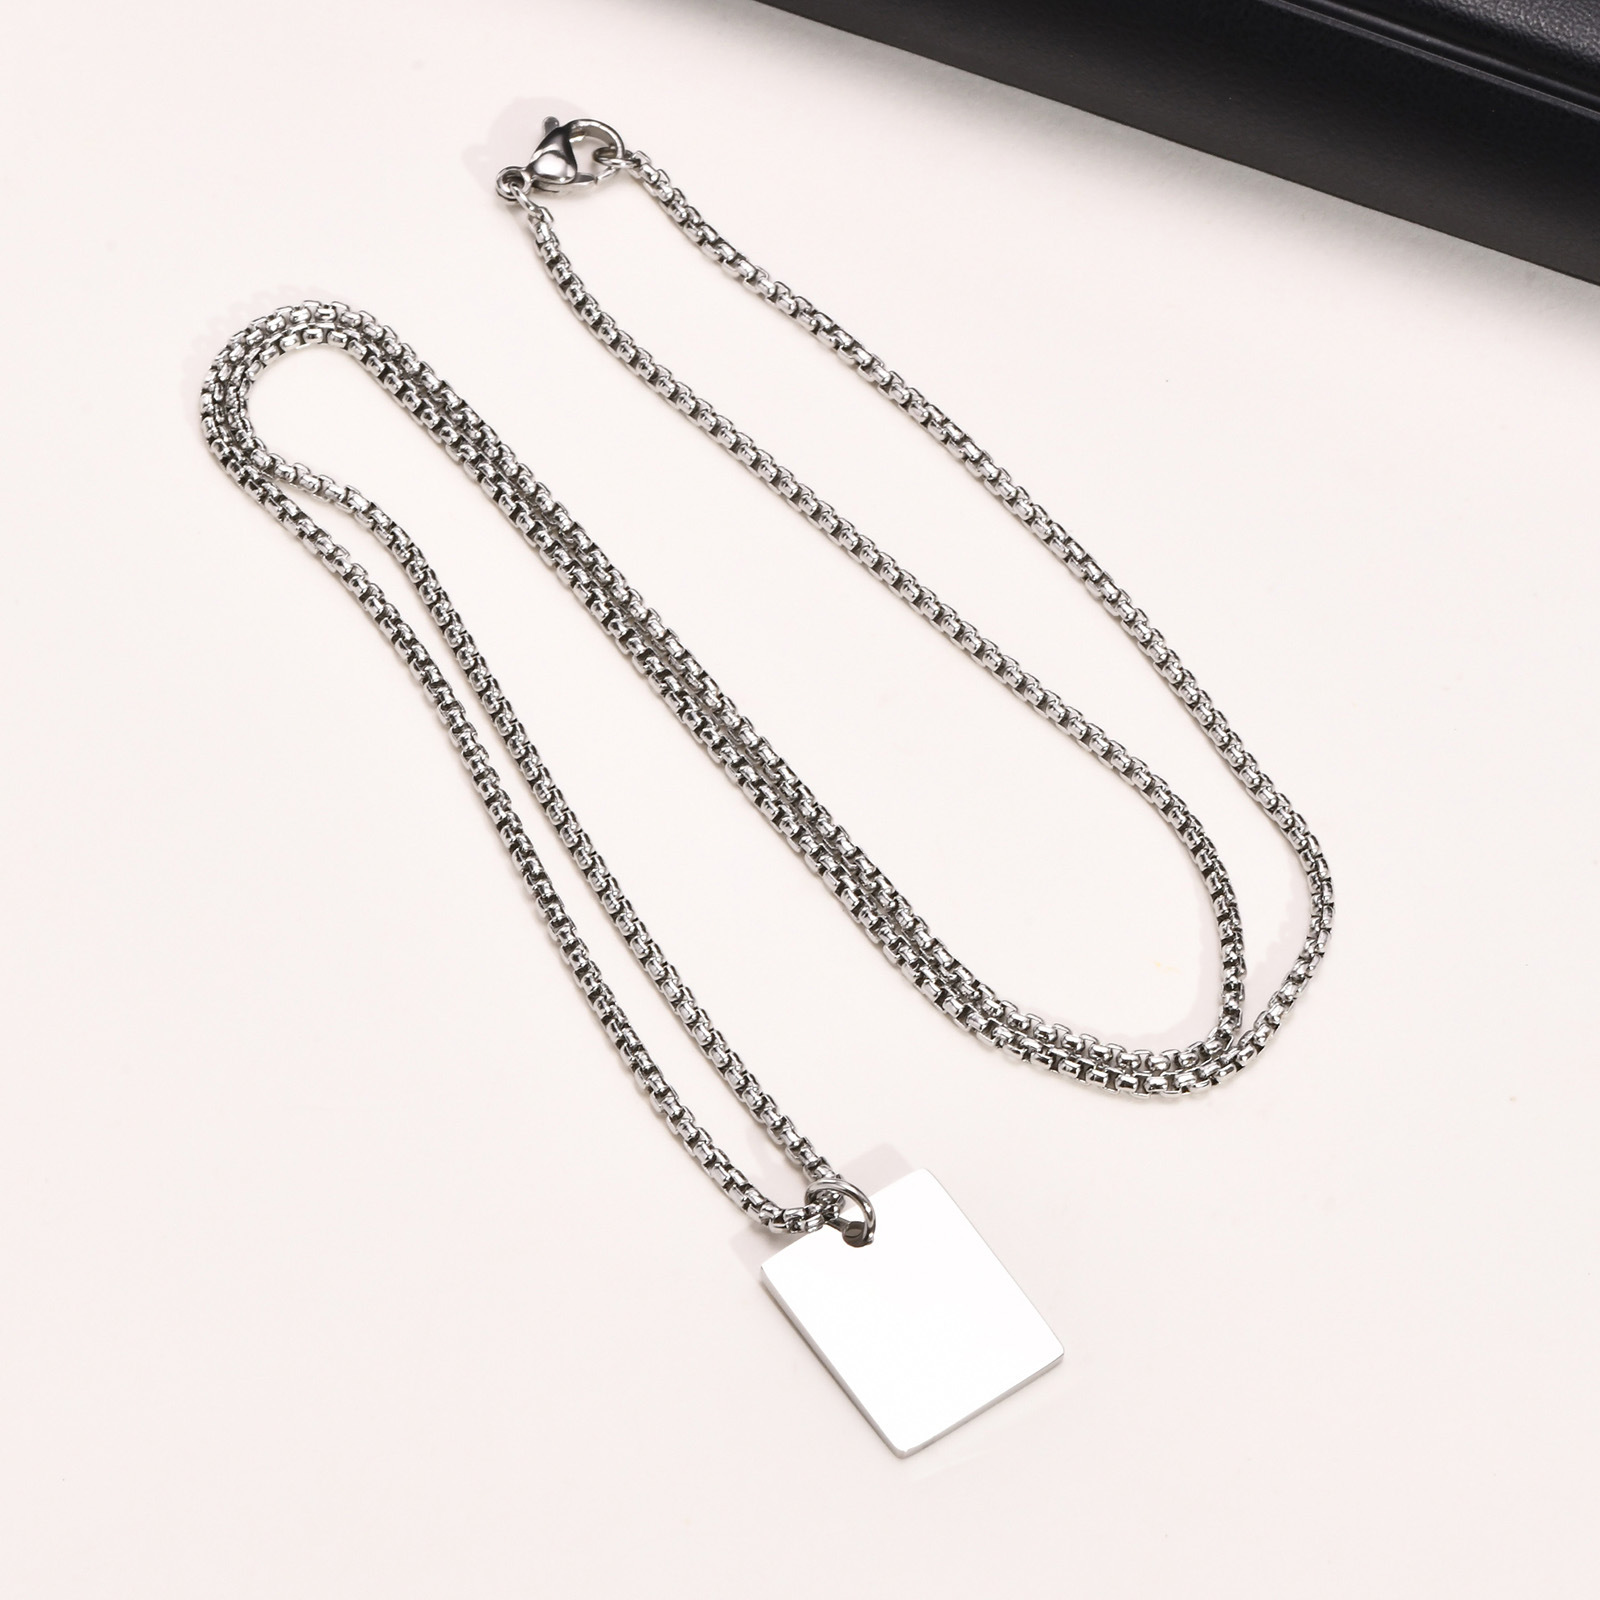 Steel pendant with chain